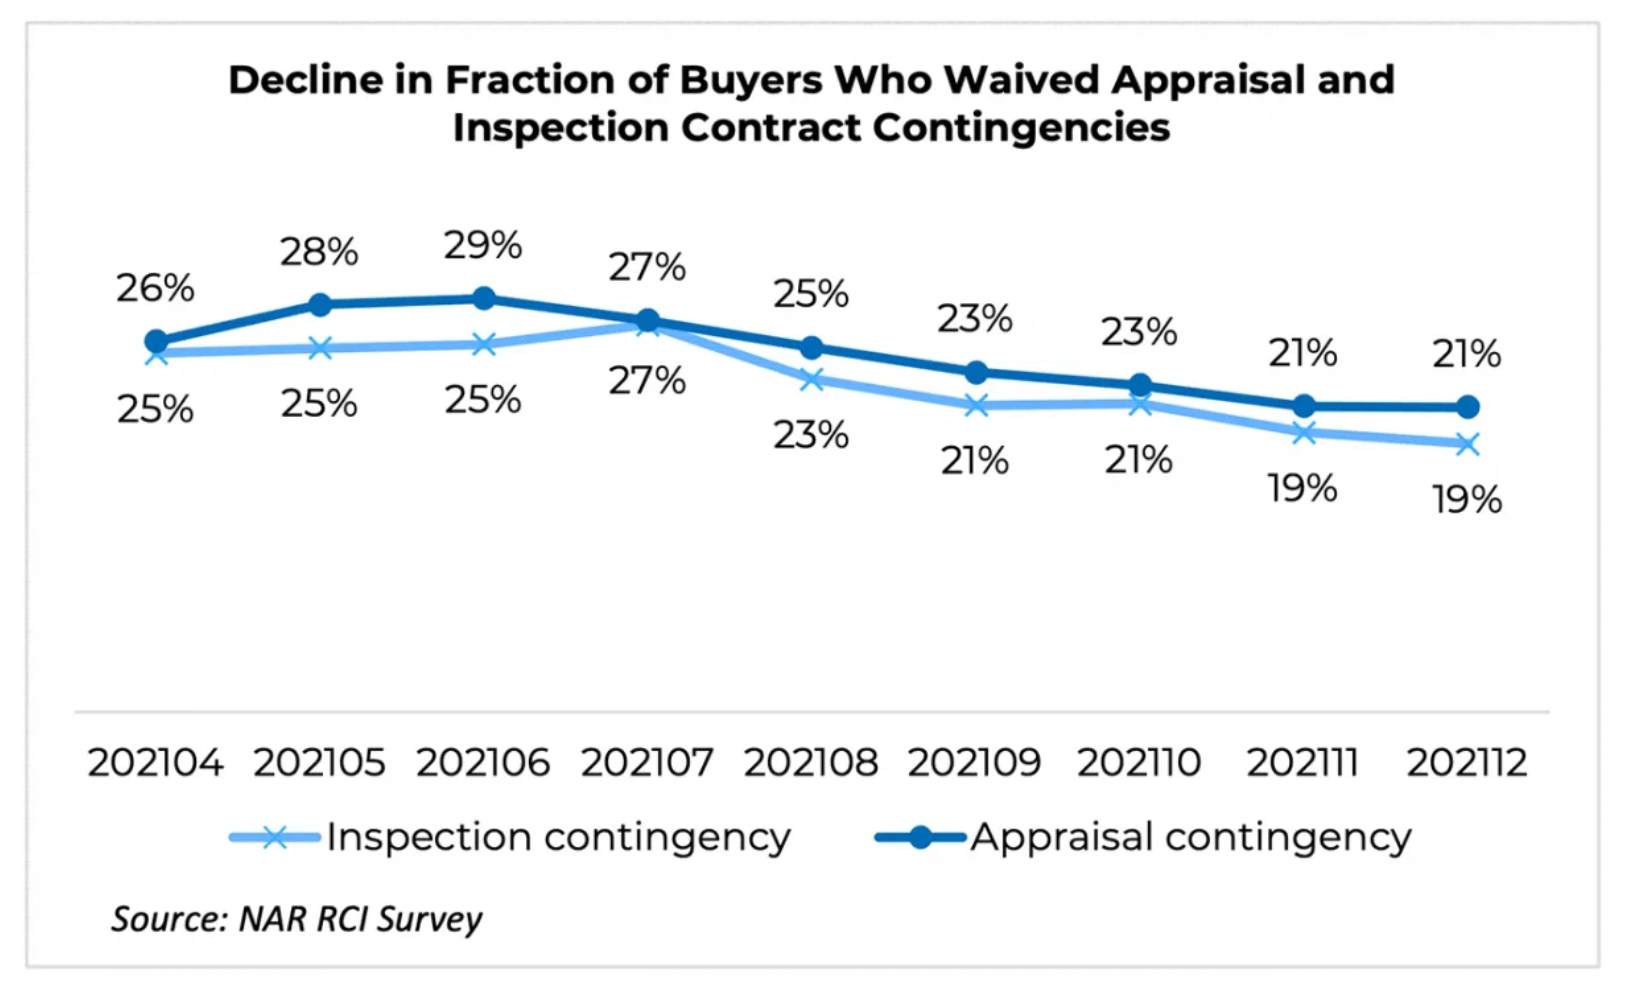 A line graph showing the decline in buyers waiving appraisals and inspections.